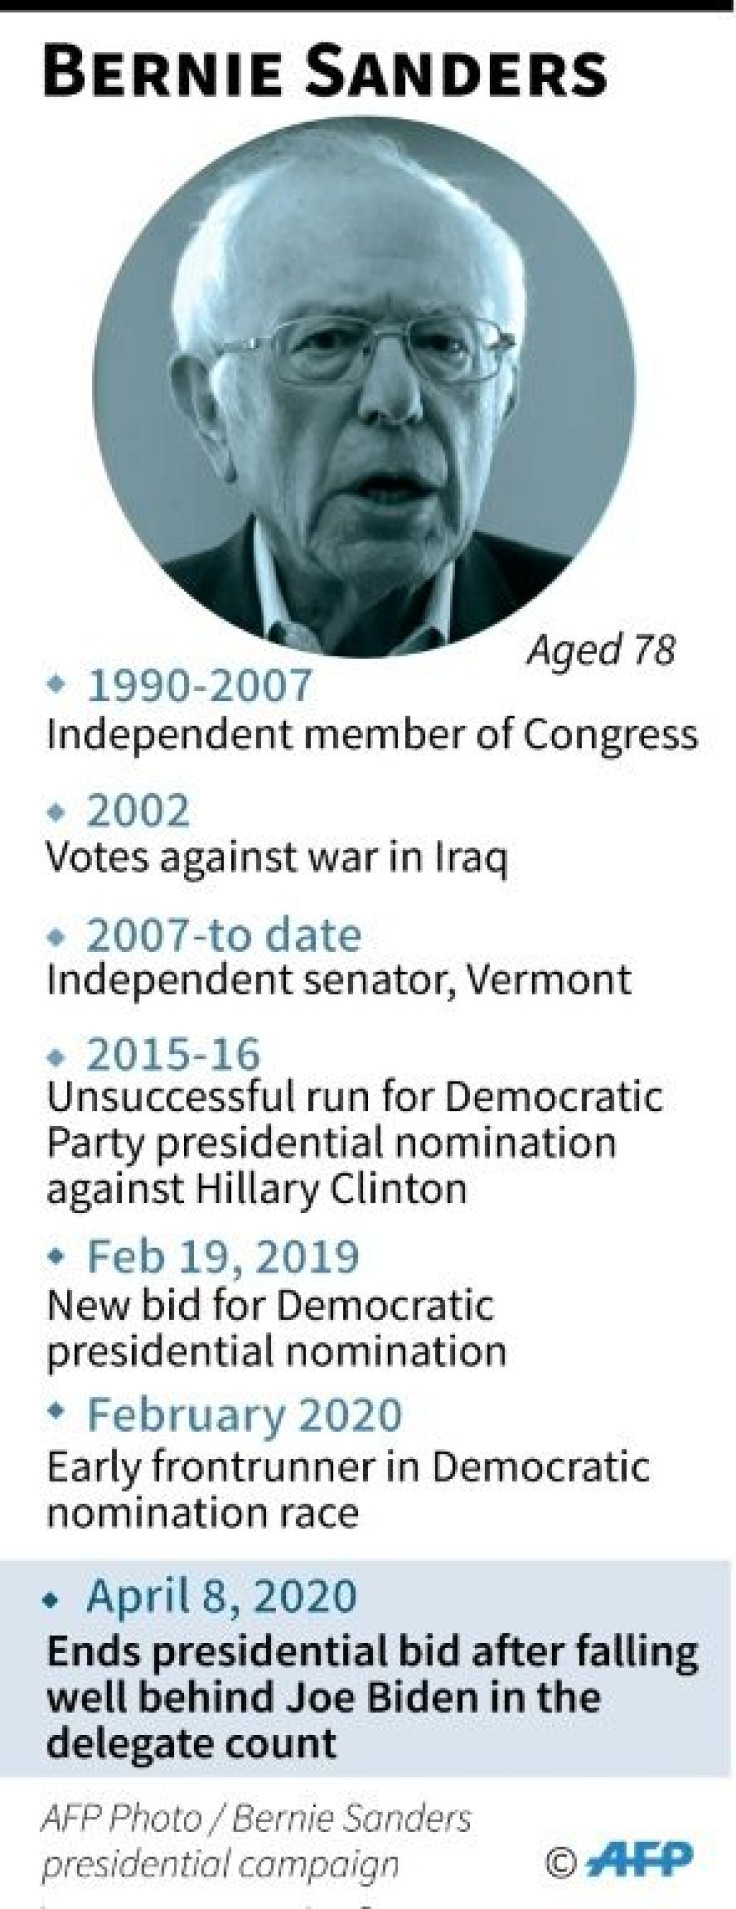 Profile of Bernie Sanders who ended his campaign for Democratic party presidential nomination leaving rival Joe Biden as the sole candidate.